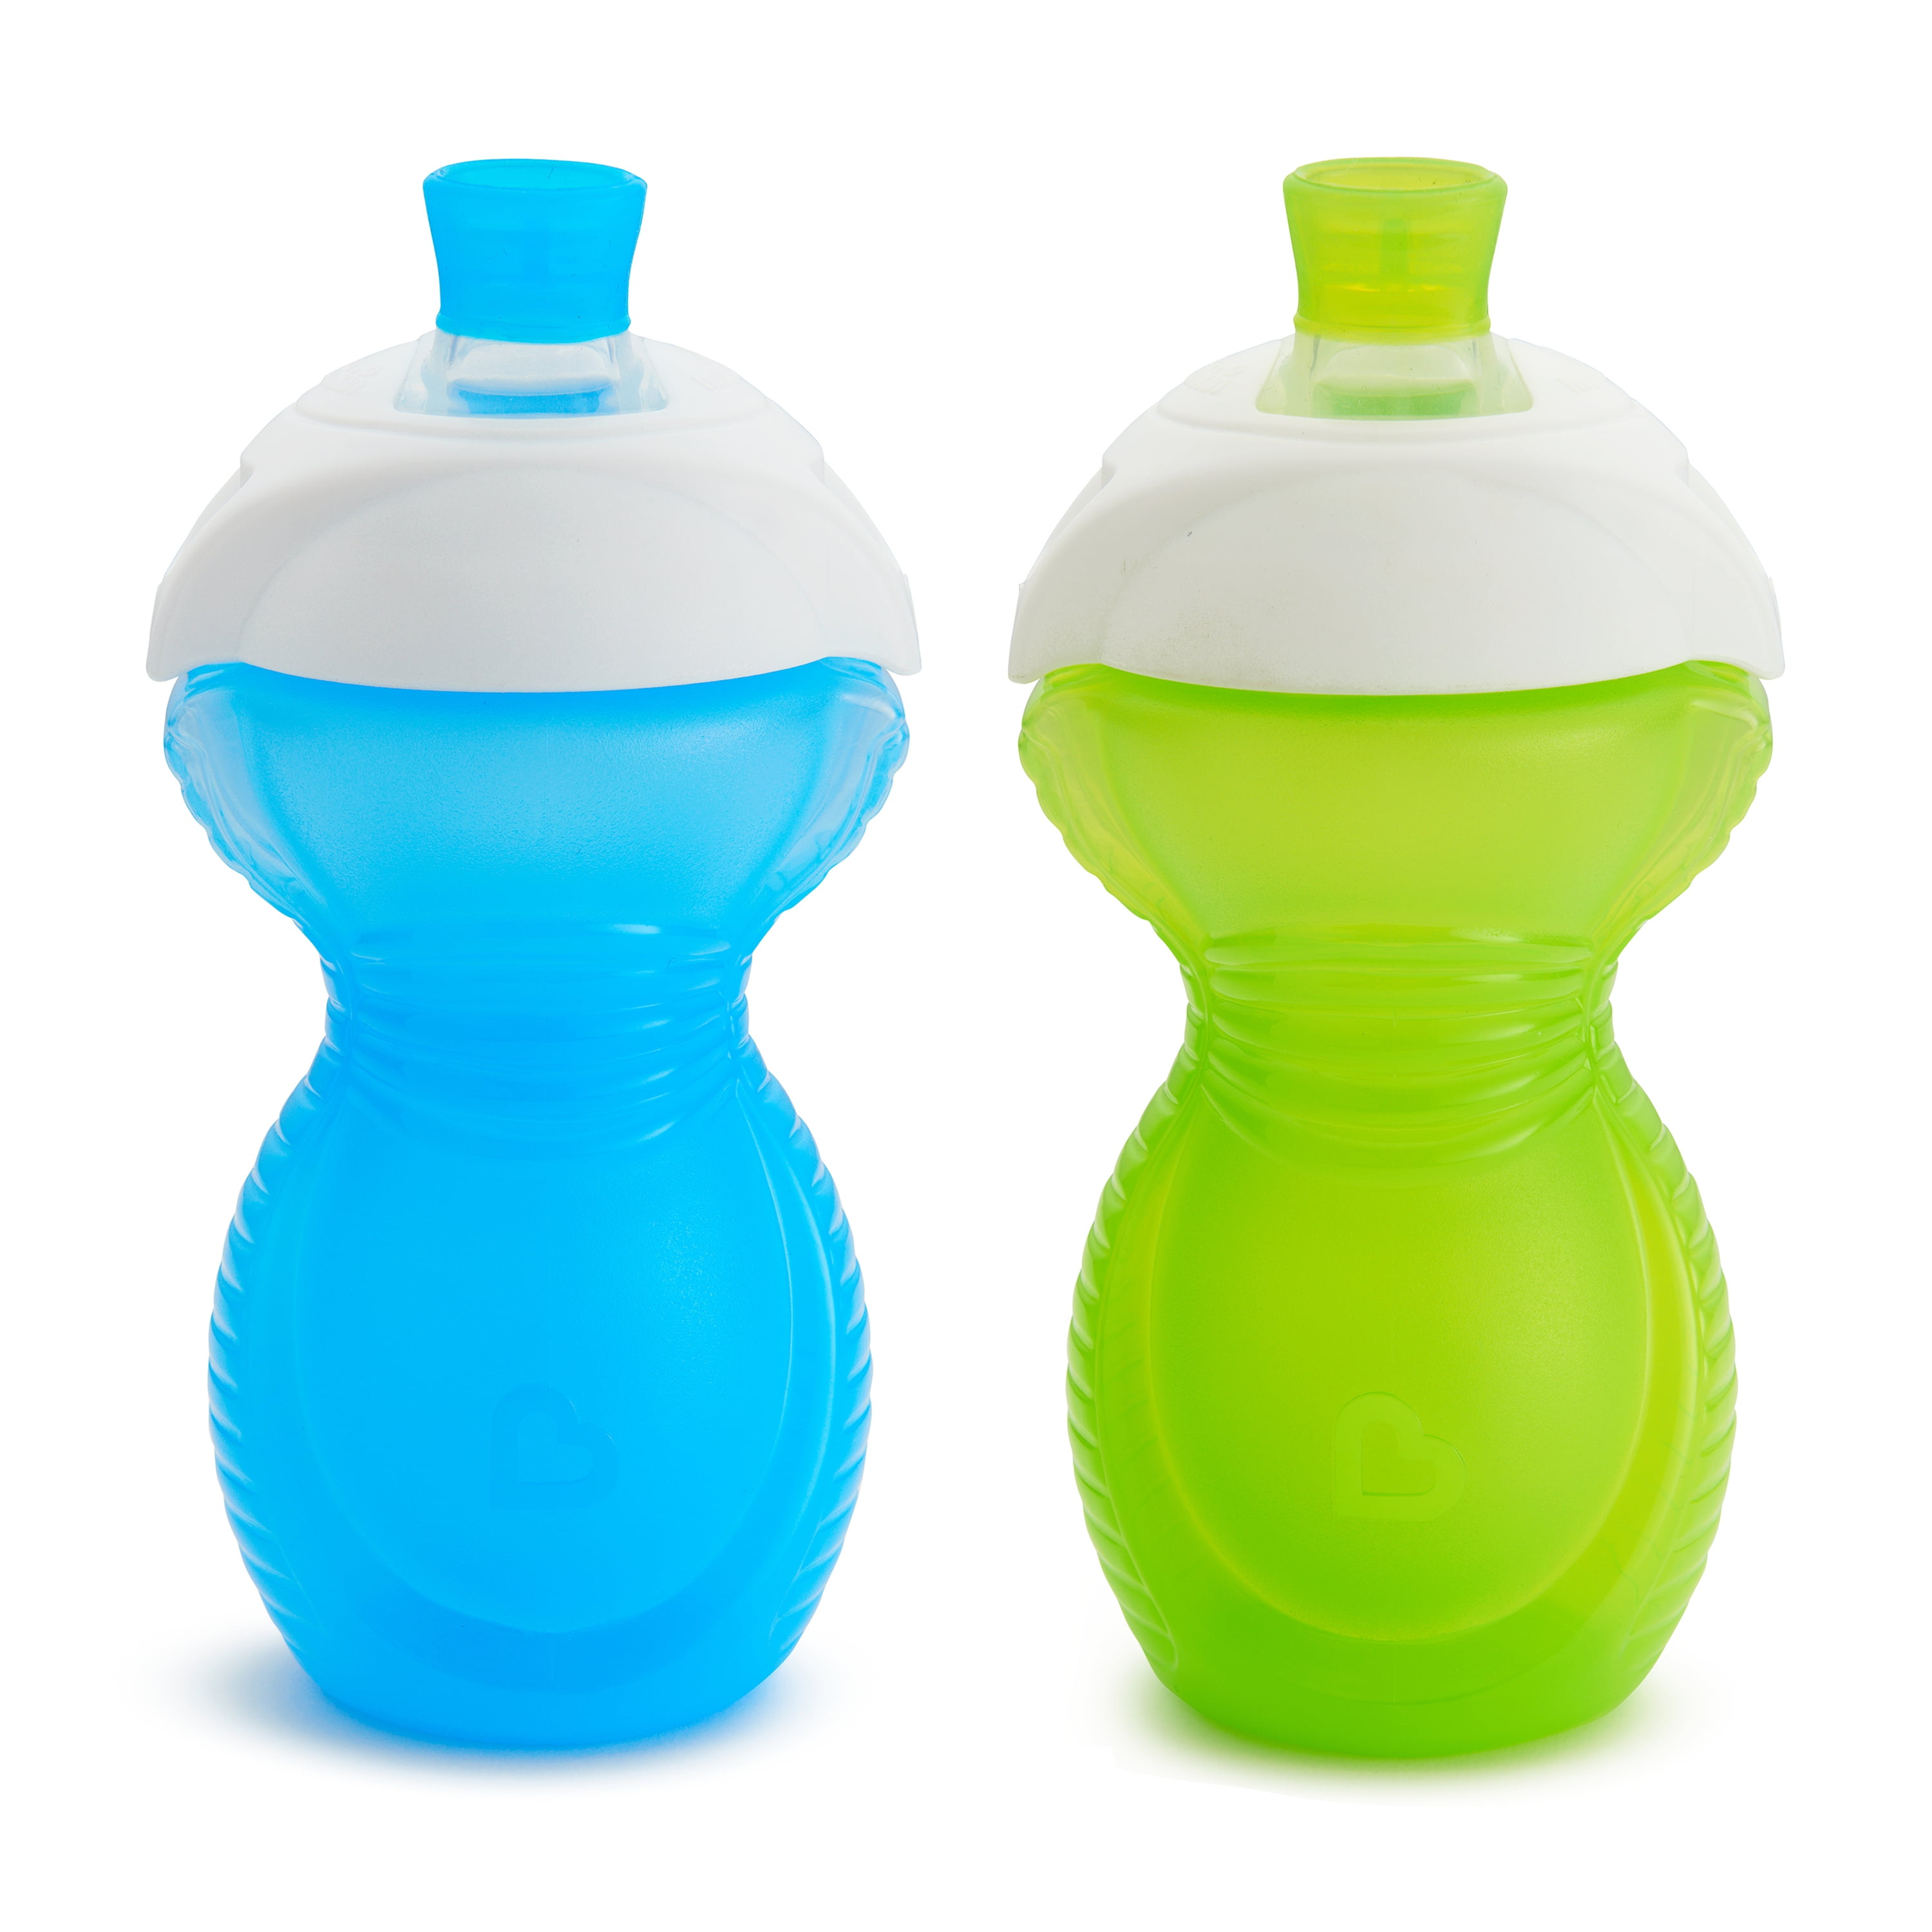 Munchkin Click Lock Soft Spout Sippy Cup, 9 oz, Blue/Green, 2 Pack